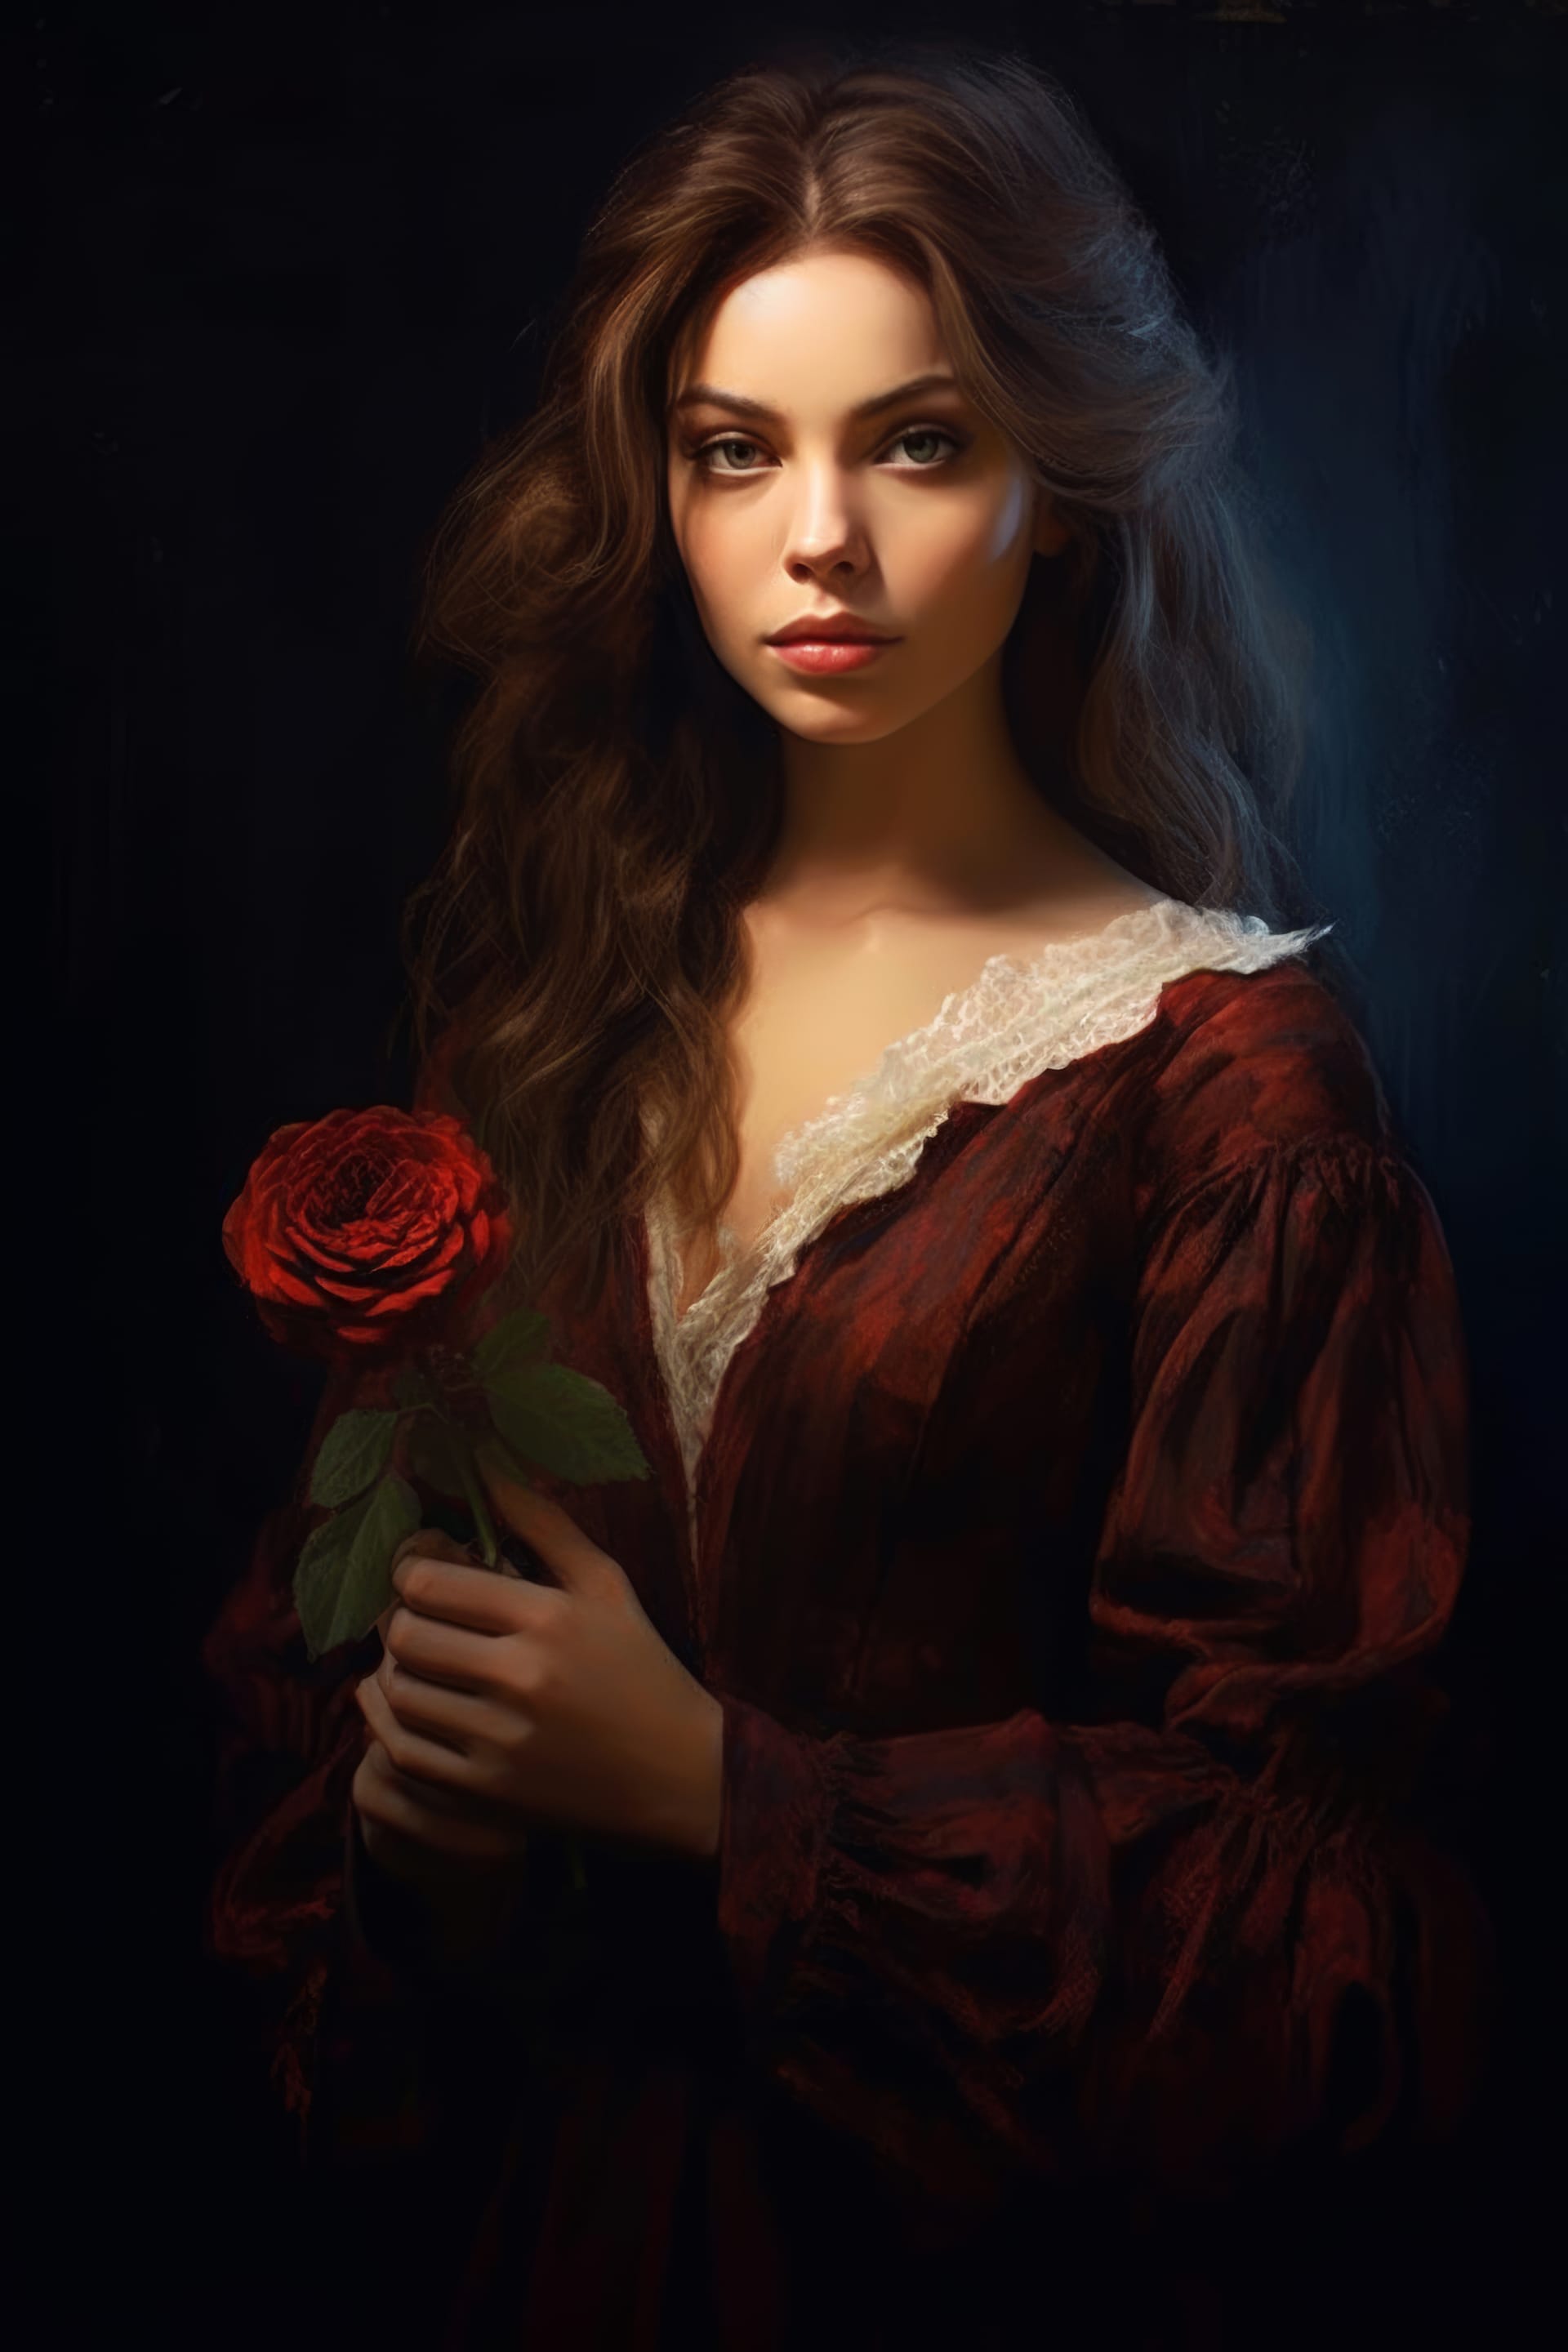 Beautiful woman with red flower her hand best profile picture for facebook